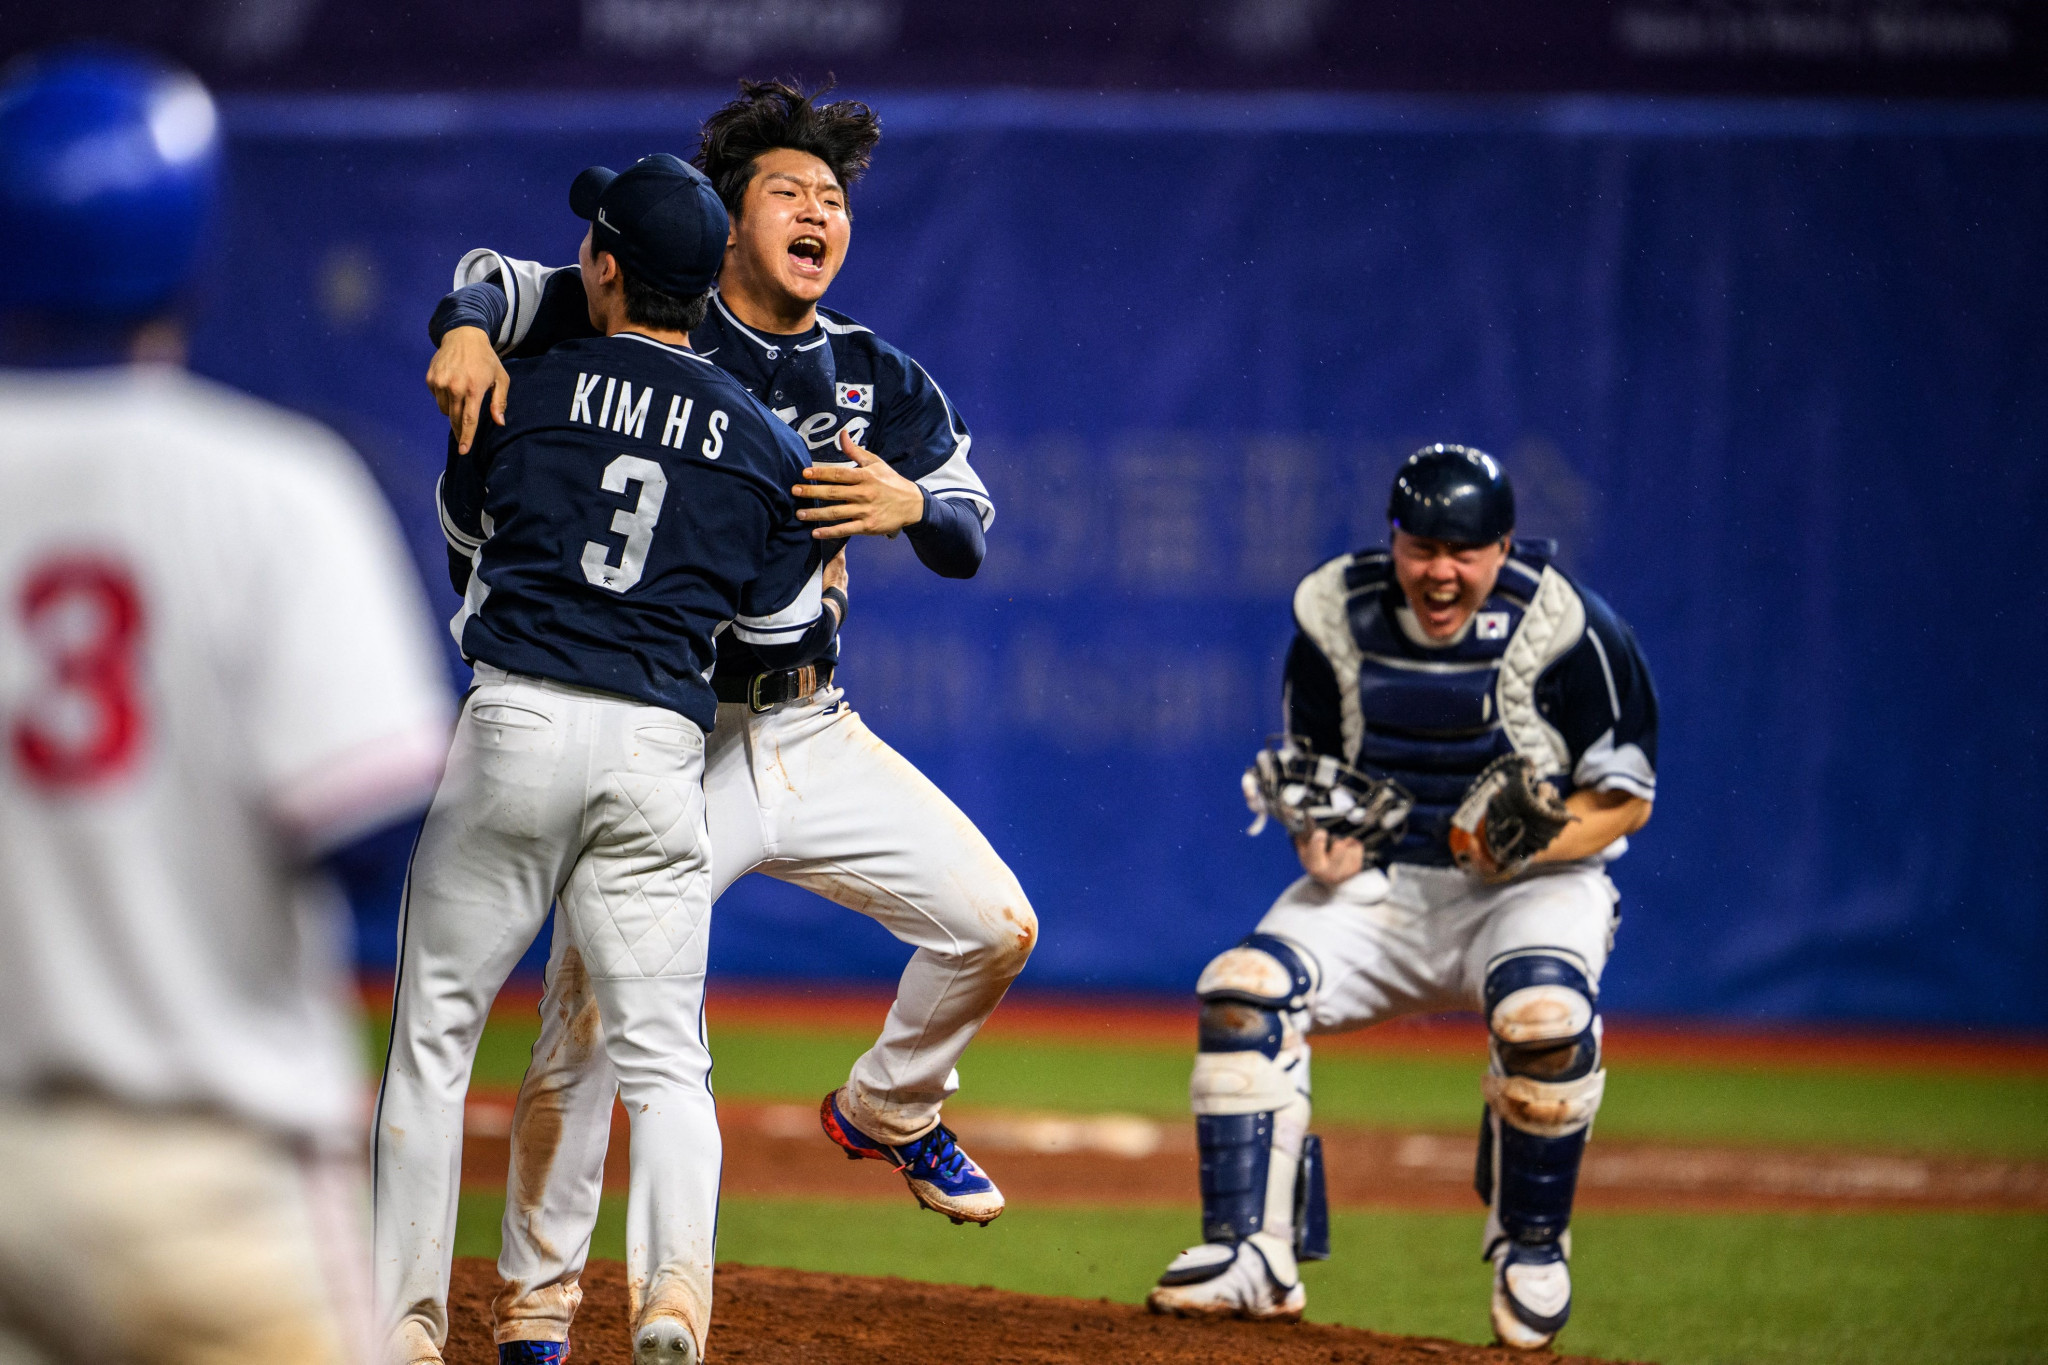 South Korea overcame Chinese Taipei to clinch the men's baseball crown ©Getty Images